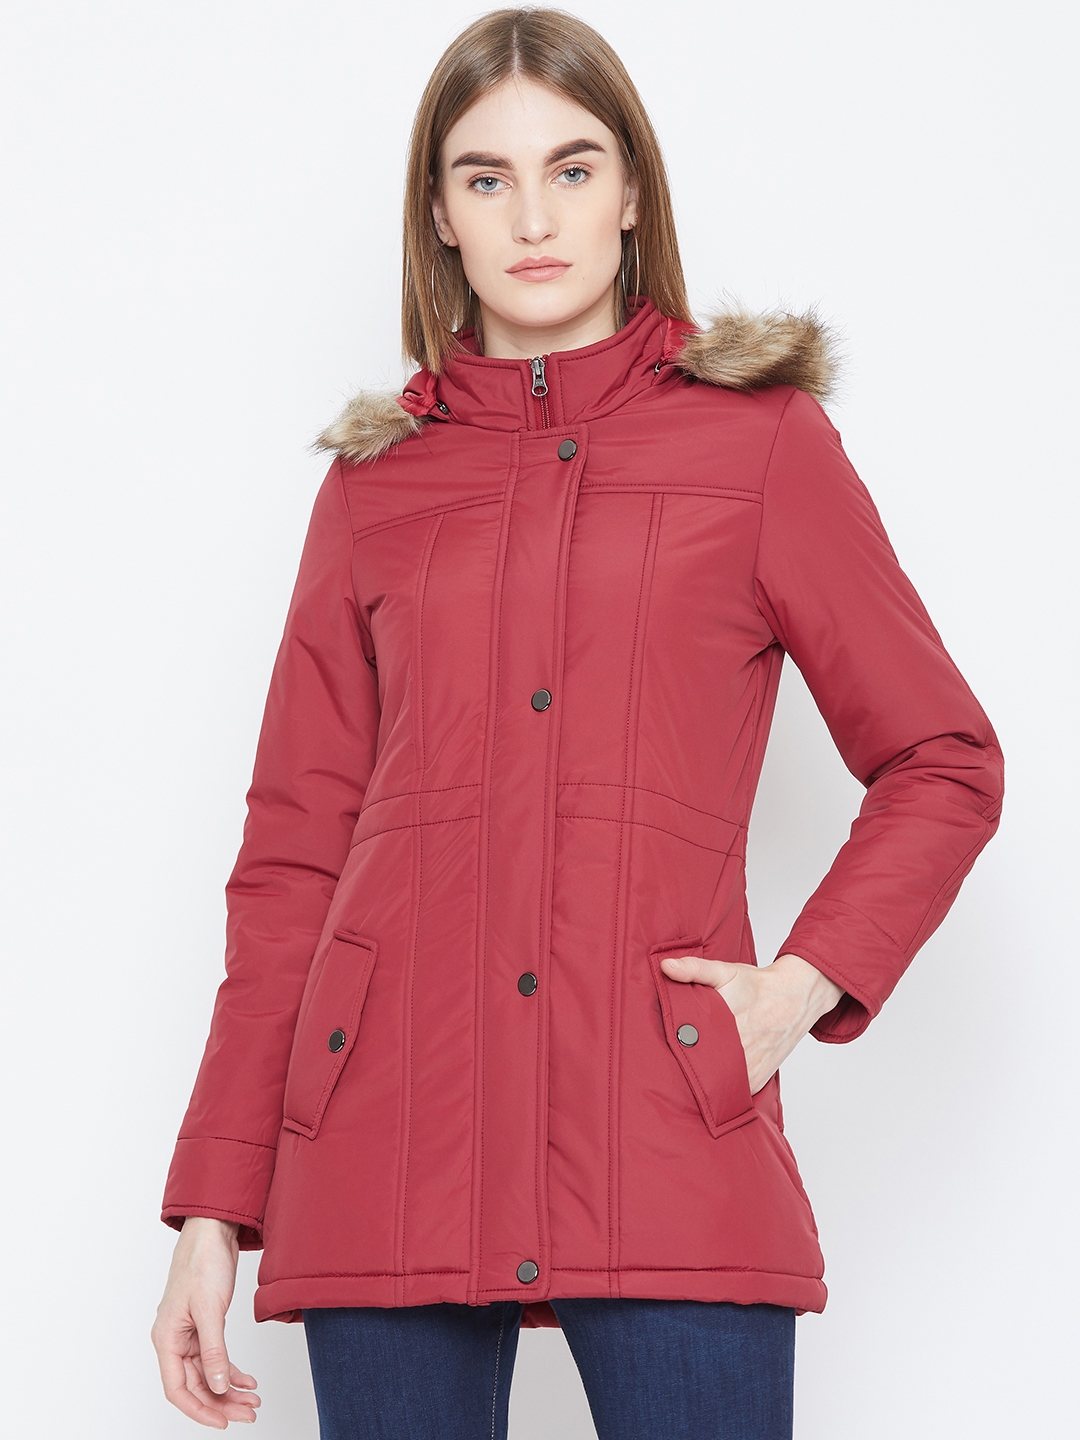 Trufit Women Red Solid Insulator Parka Jacket with Detachable Hood